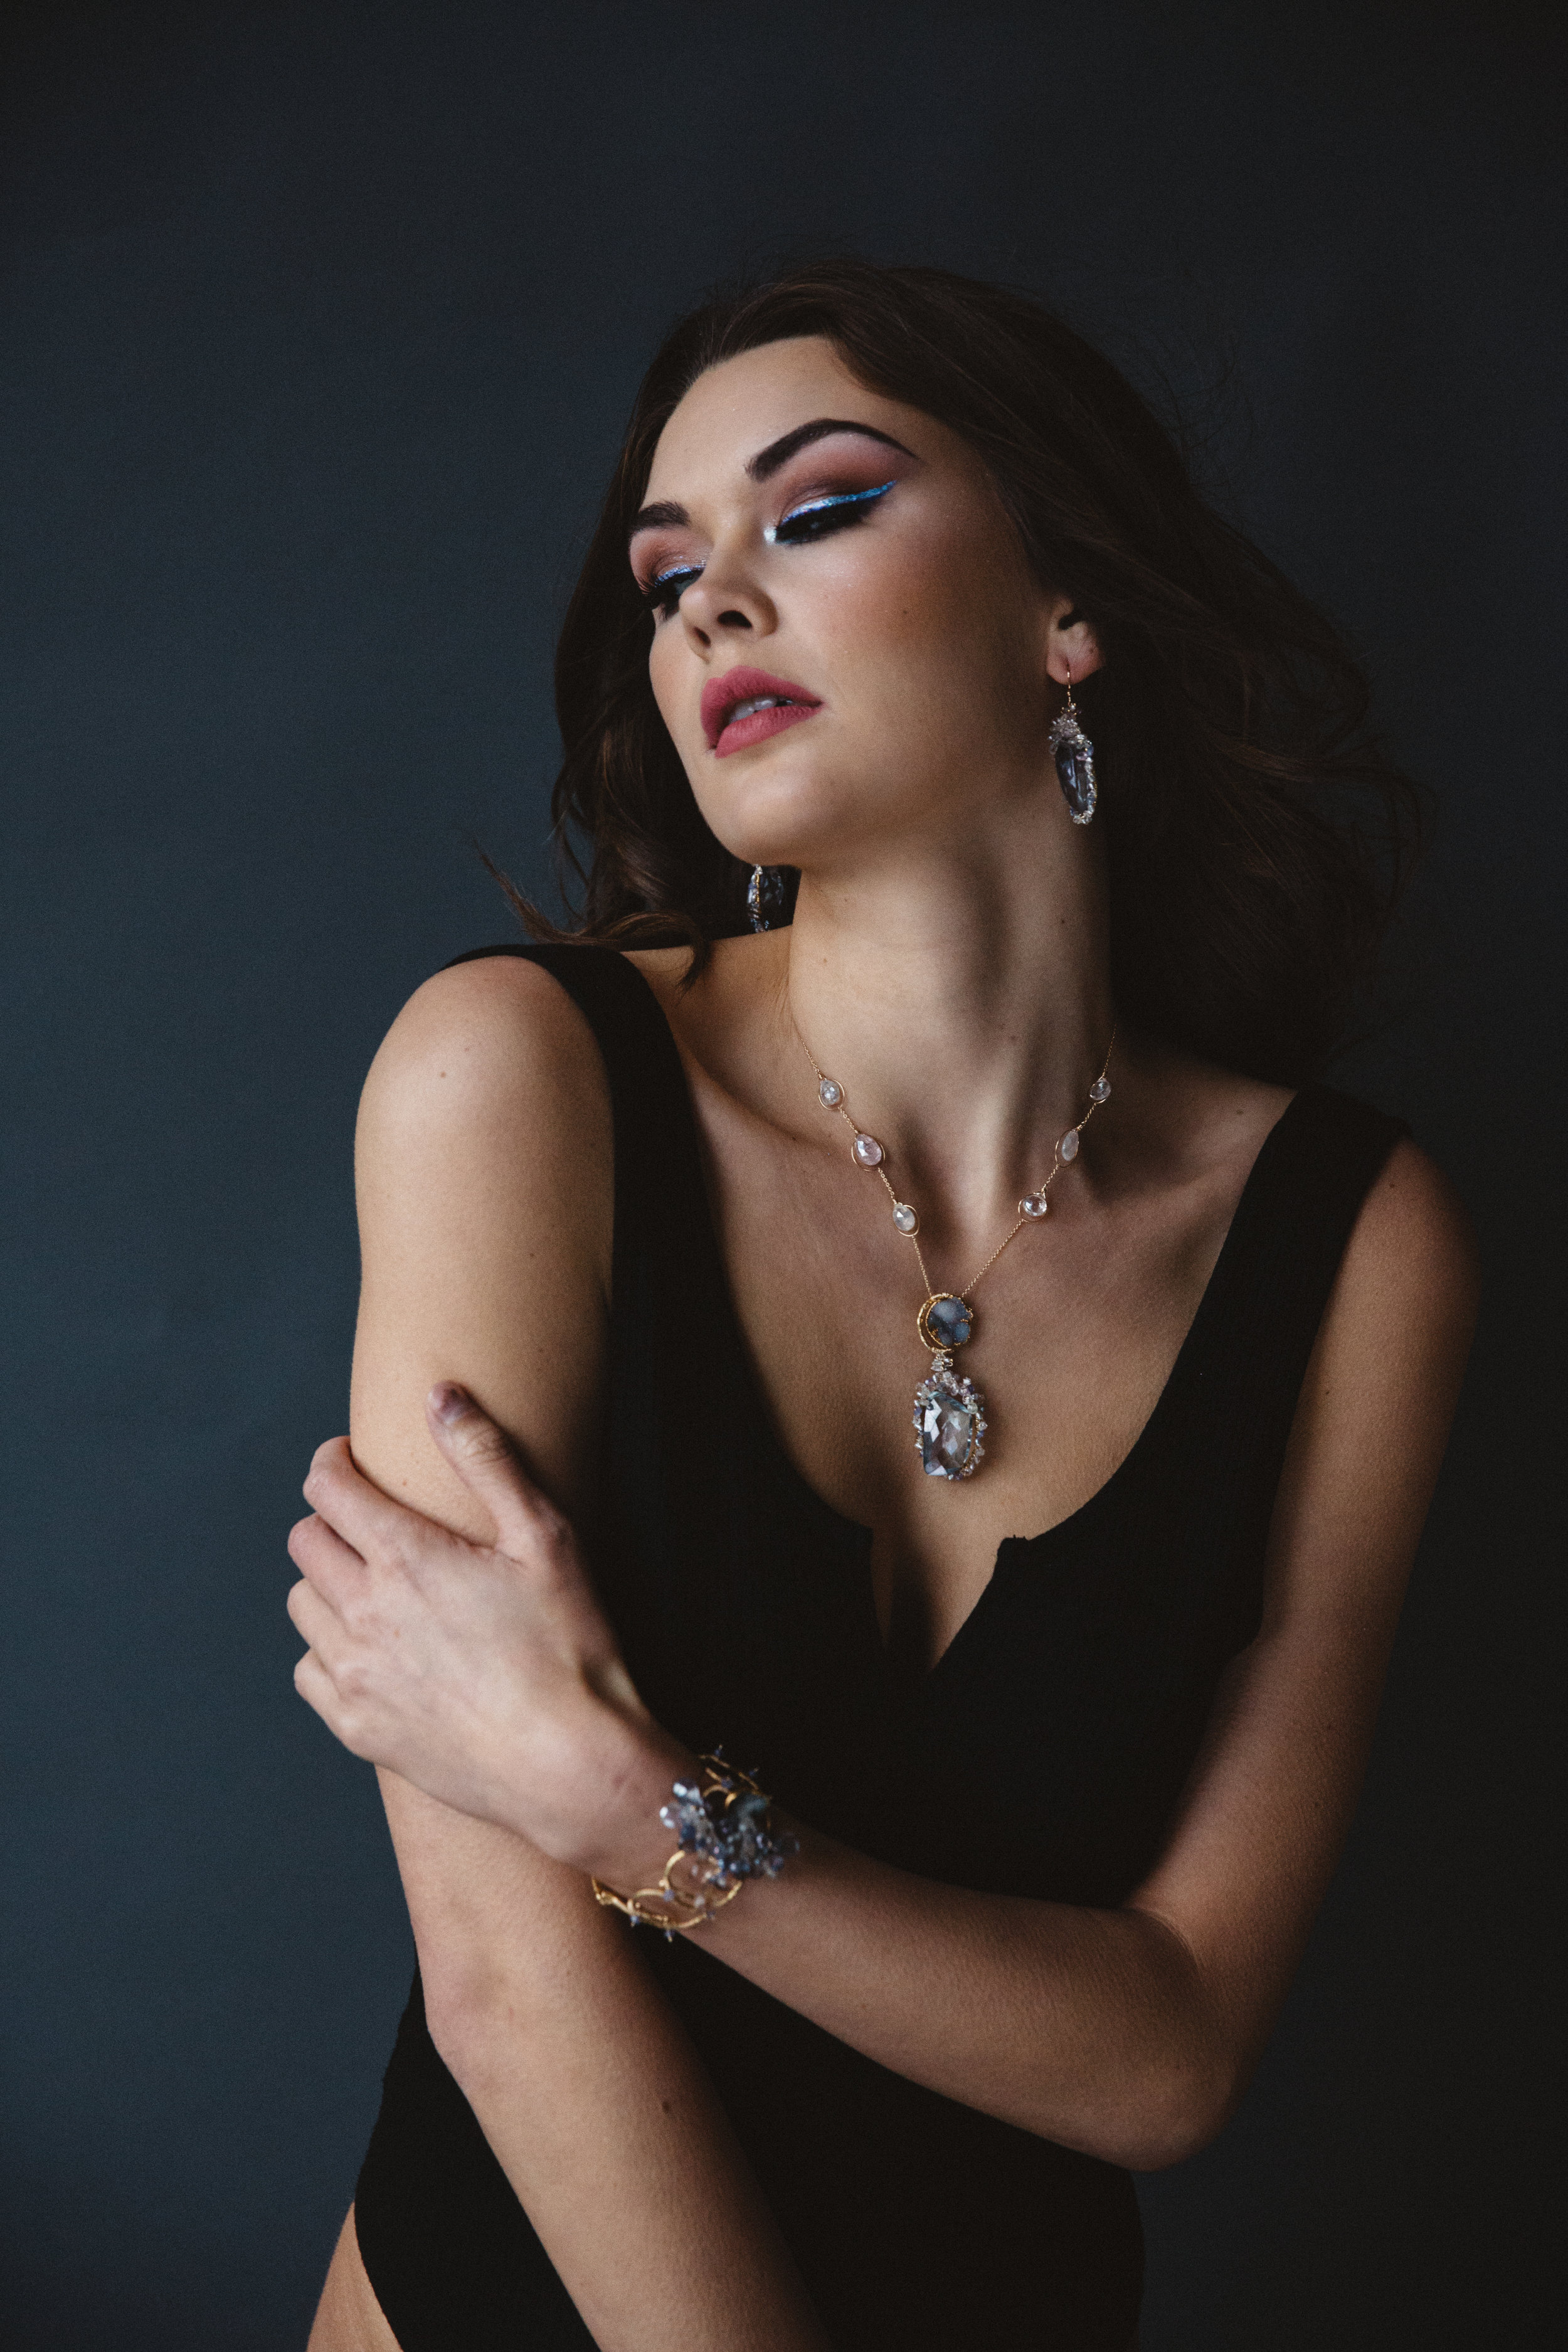 model wearing sapphire and druzy pendant necklace